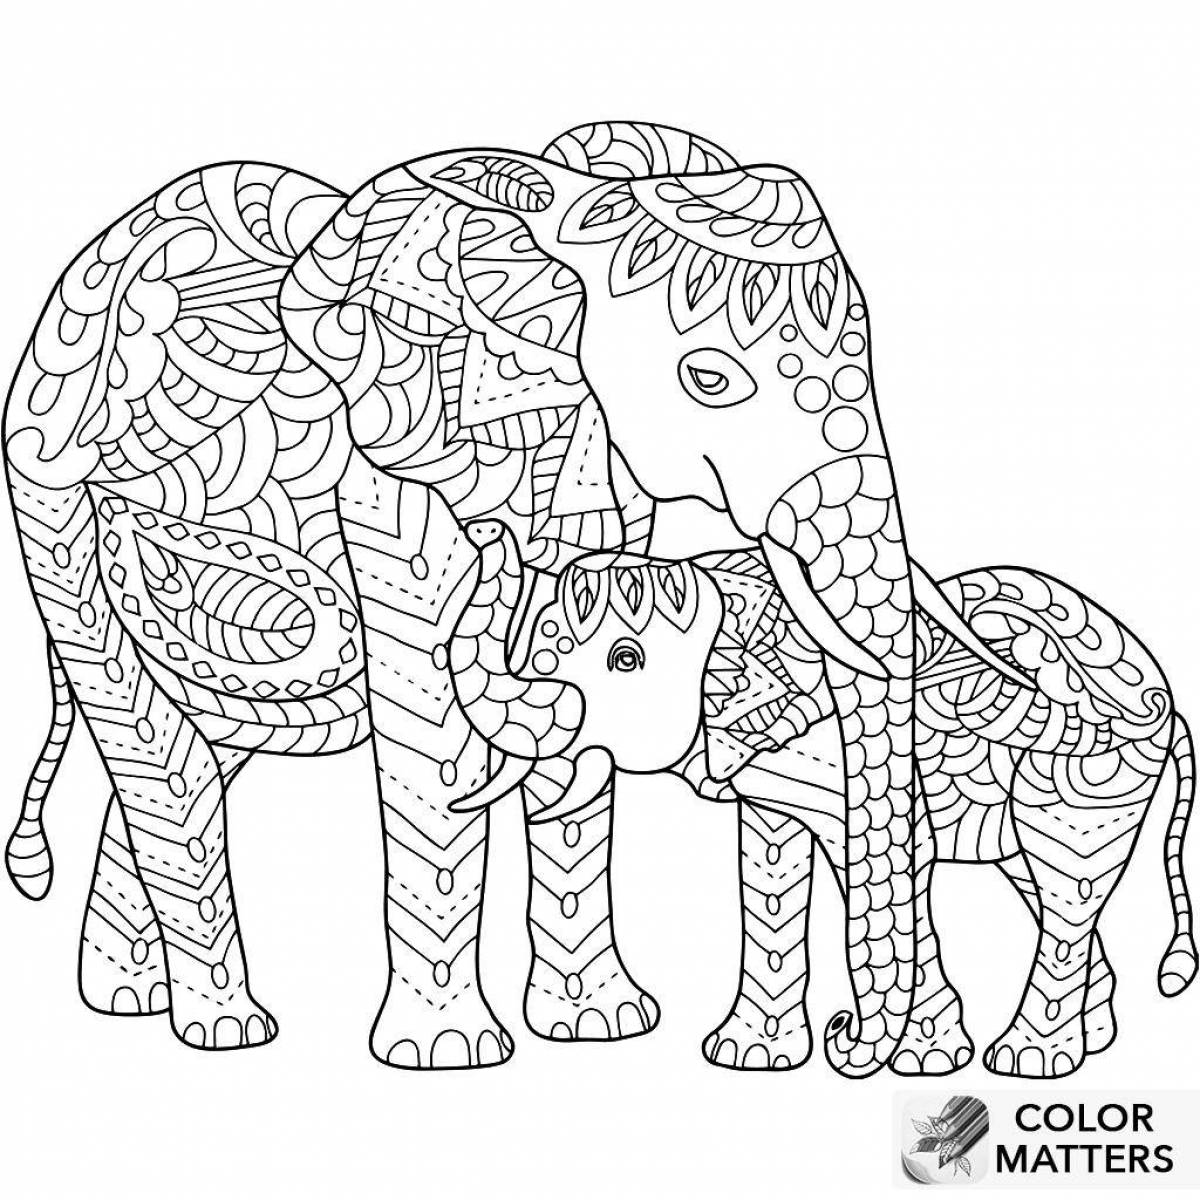 Coloring book nice elephant